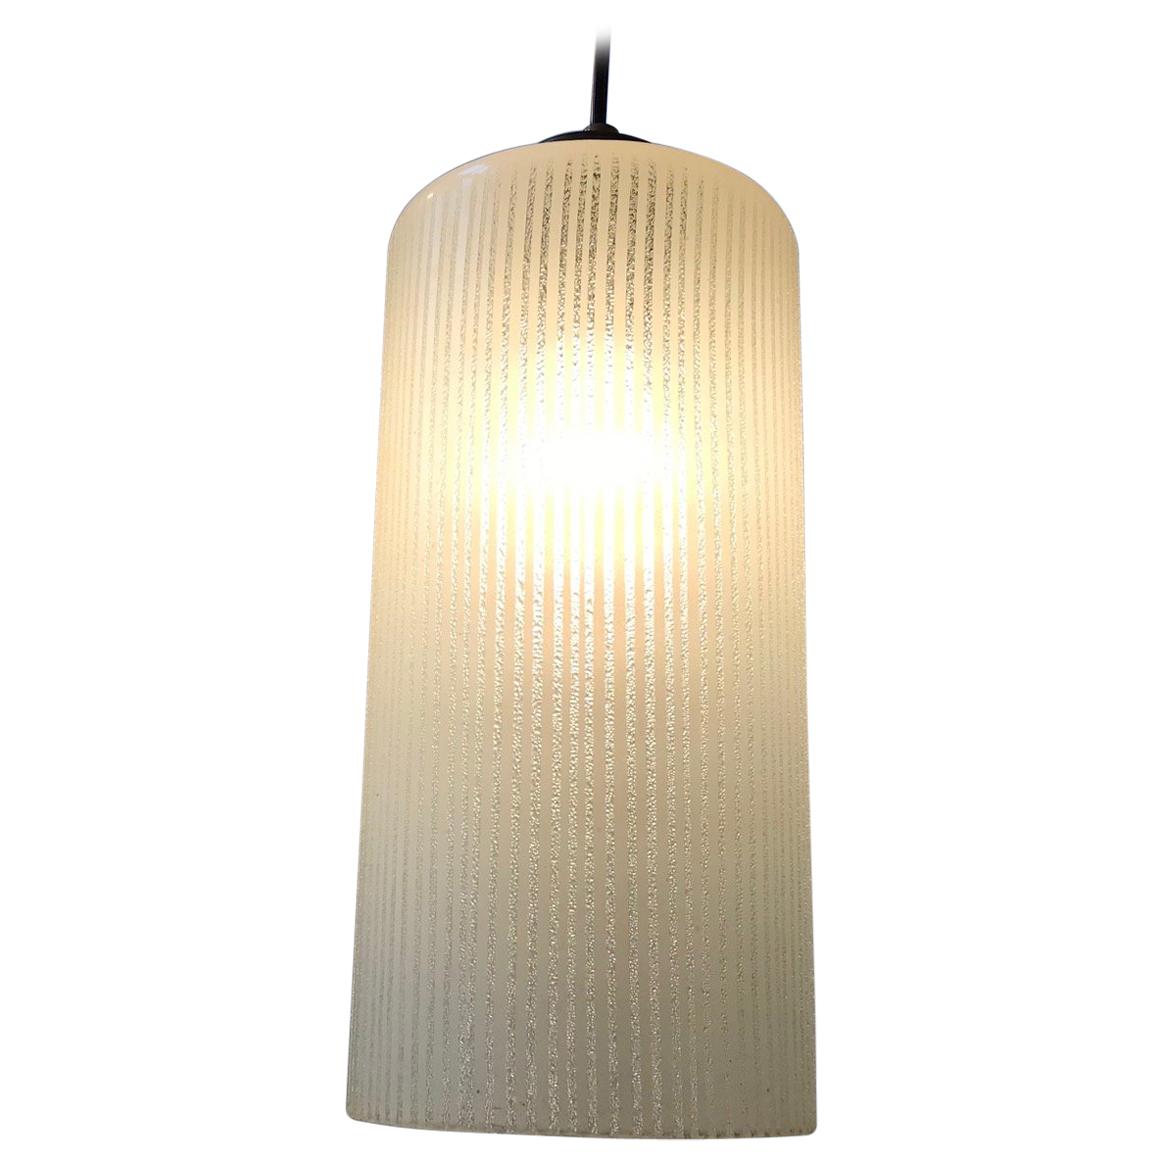 Vintage Danish Functionalist Pendant Light in Pinstriped Glass from Voss, 1950s